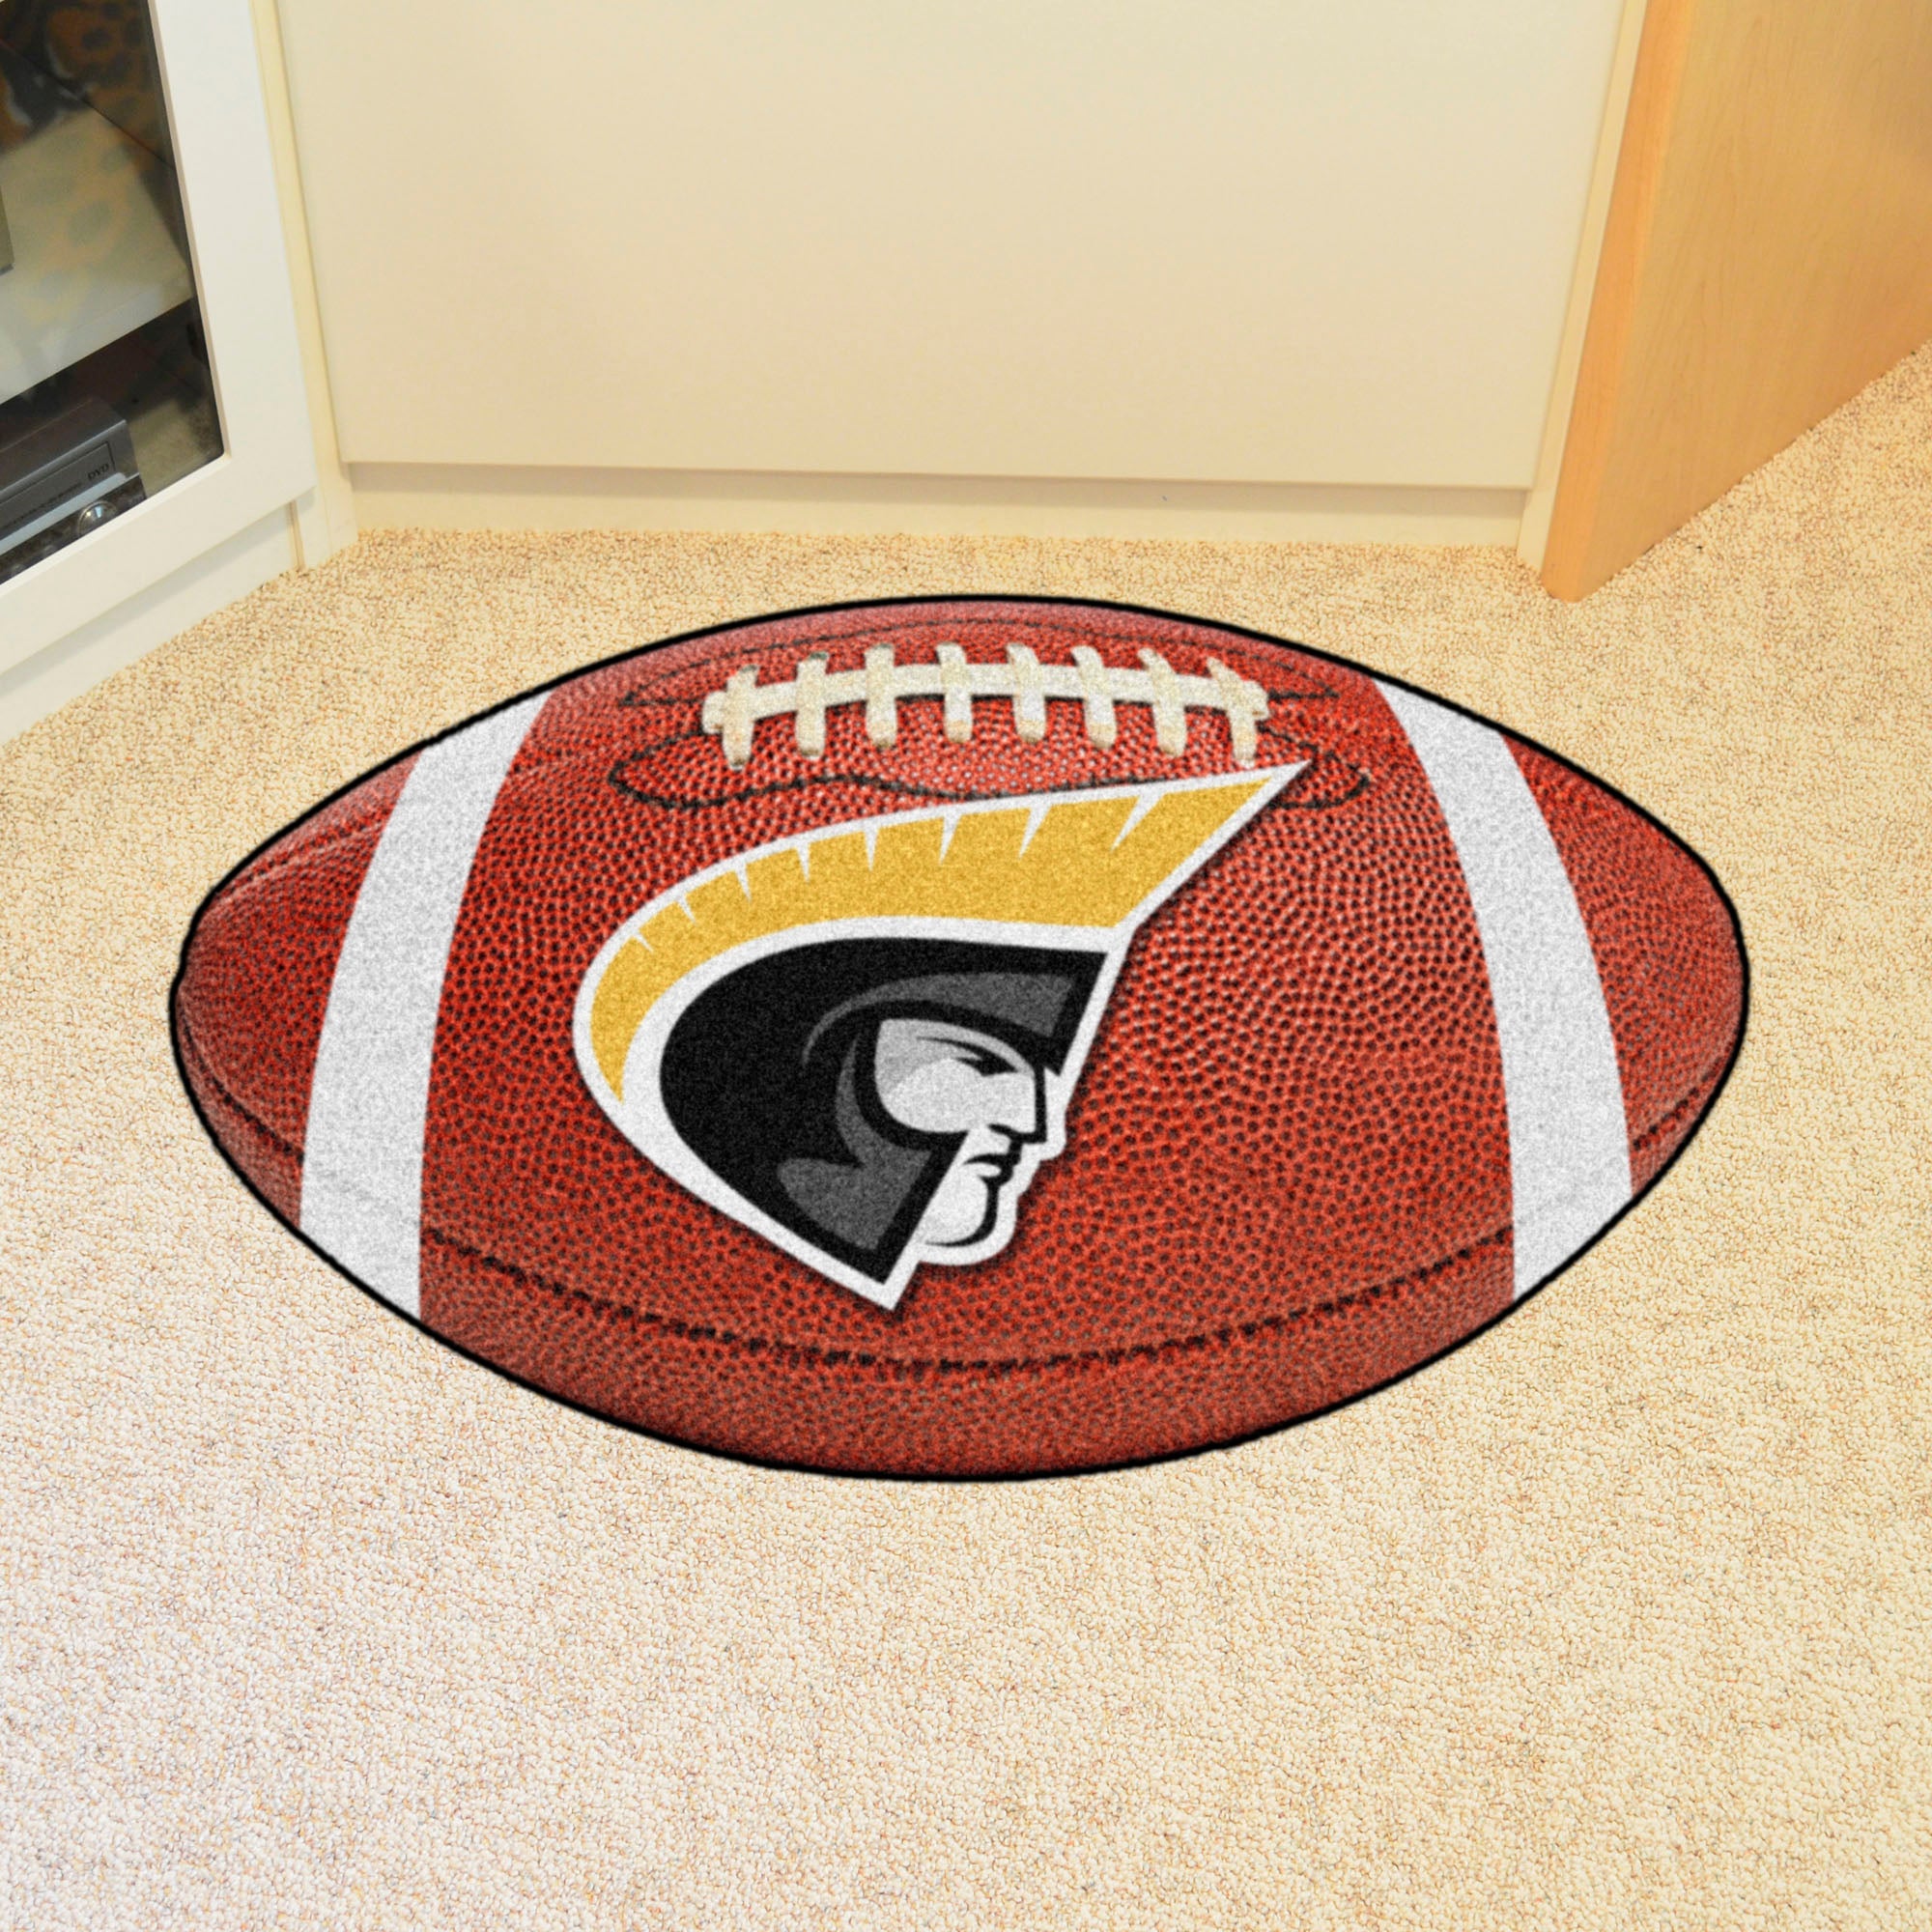 FANMATS, Anderson University (SC) Football Rug - 20.5in. x 32.5in.